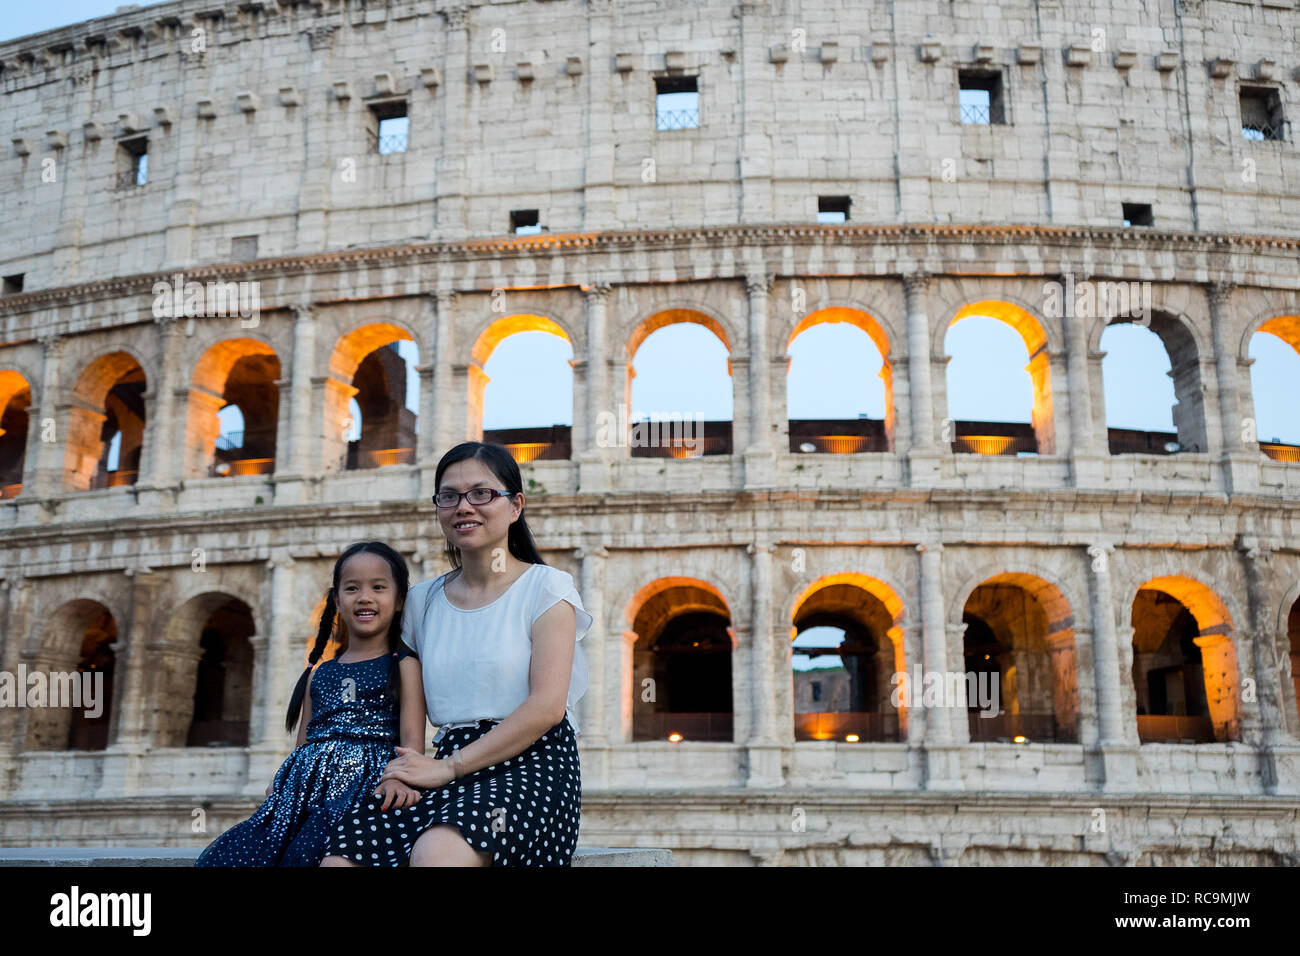 Rome, Italy, 07/27/2018: mother and daughter, Korean turists, are photographed with the illuminated Colosseum behind them. Stock Photo